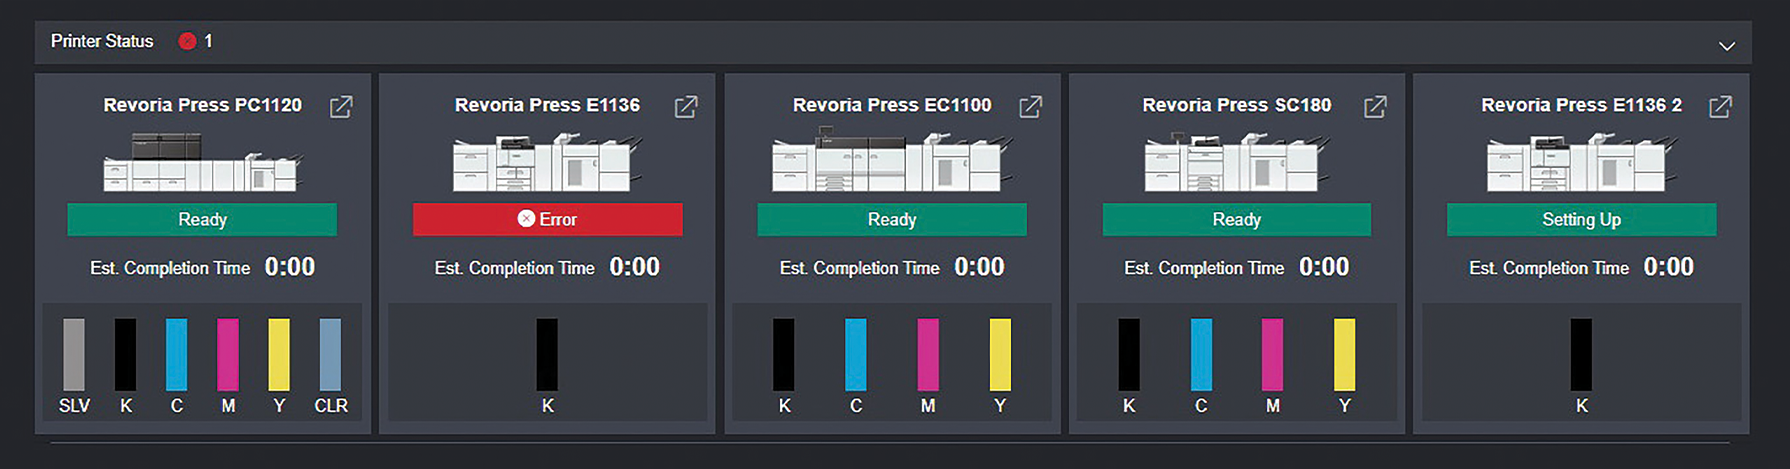 Screenshot that shows the printer status of multiple devices.